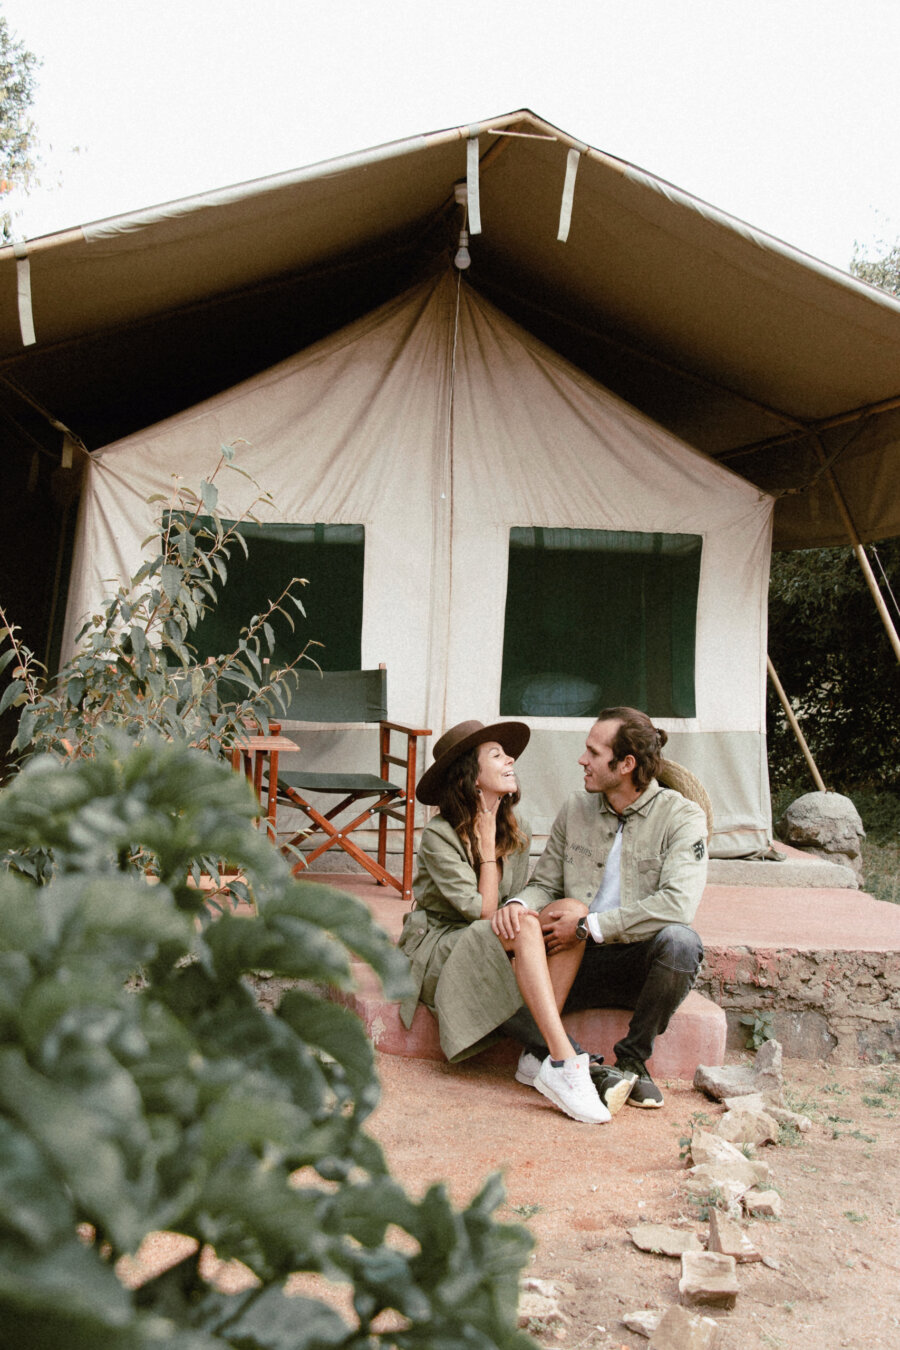 Pili and Dano sitting in front of their tent in the tented camp in the Masai Mara